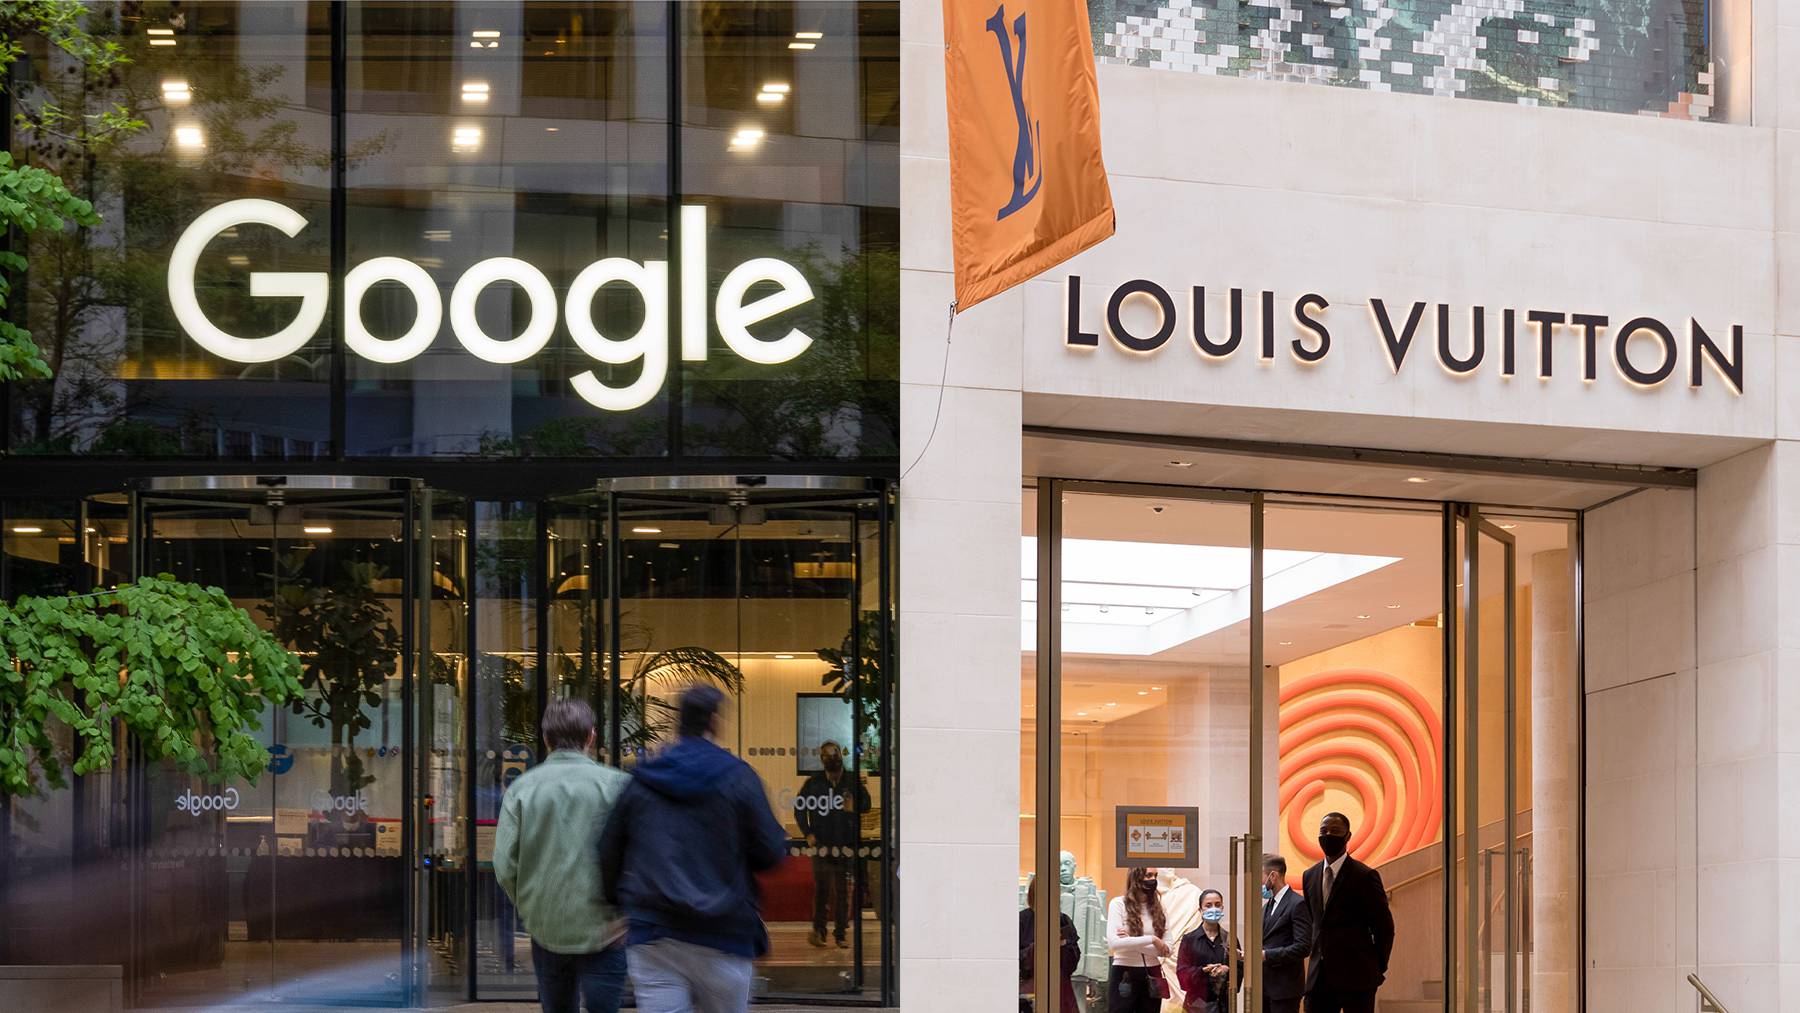 LVMH and Google's team-up could be a sign the luxury sector is finally leaning into a technology-heavy future. Getty.